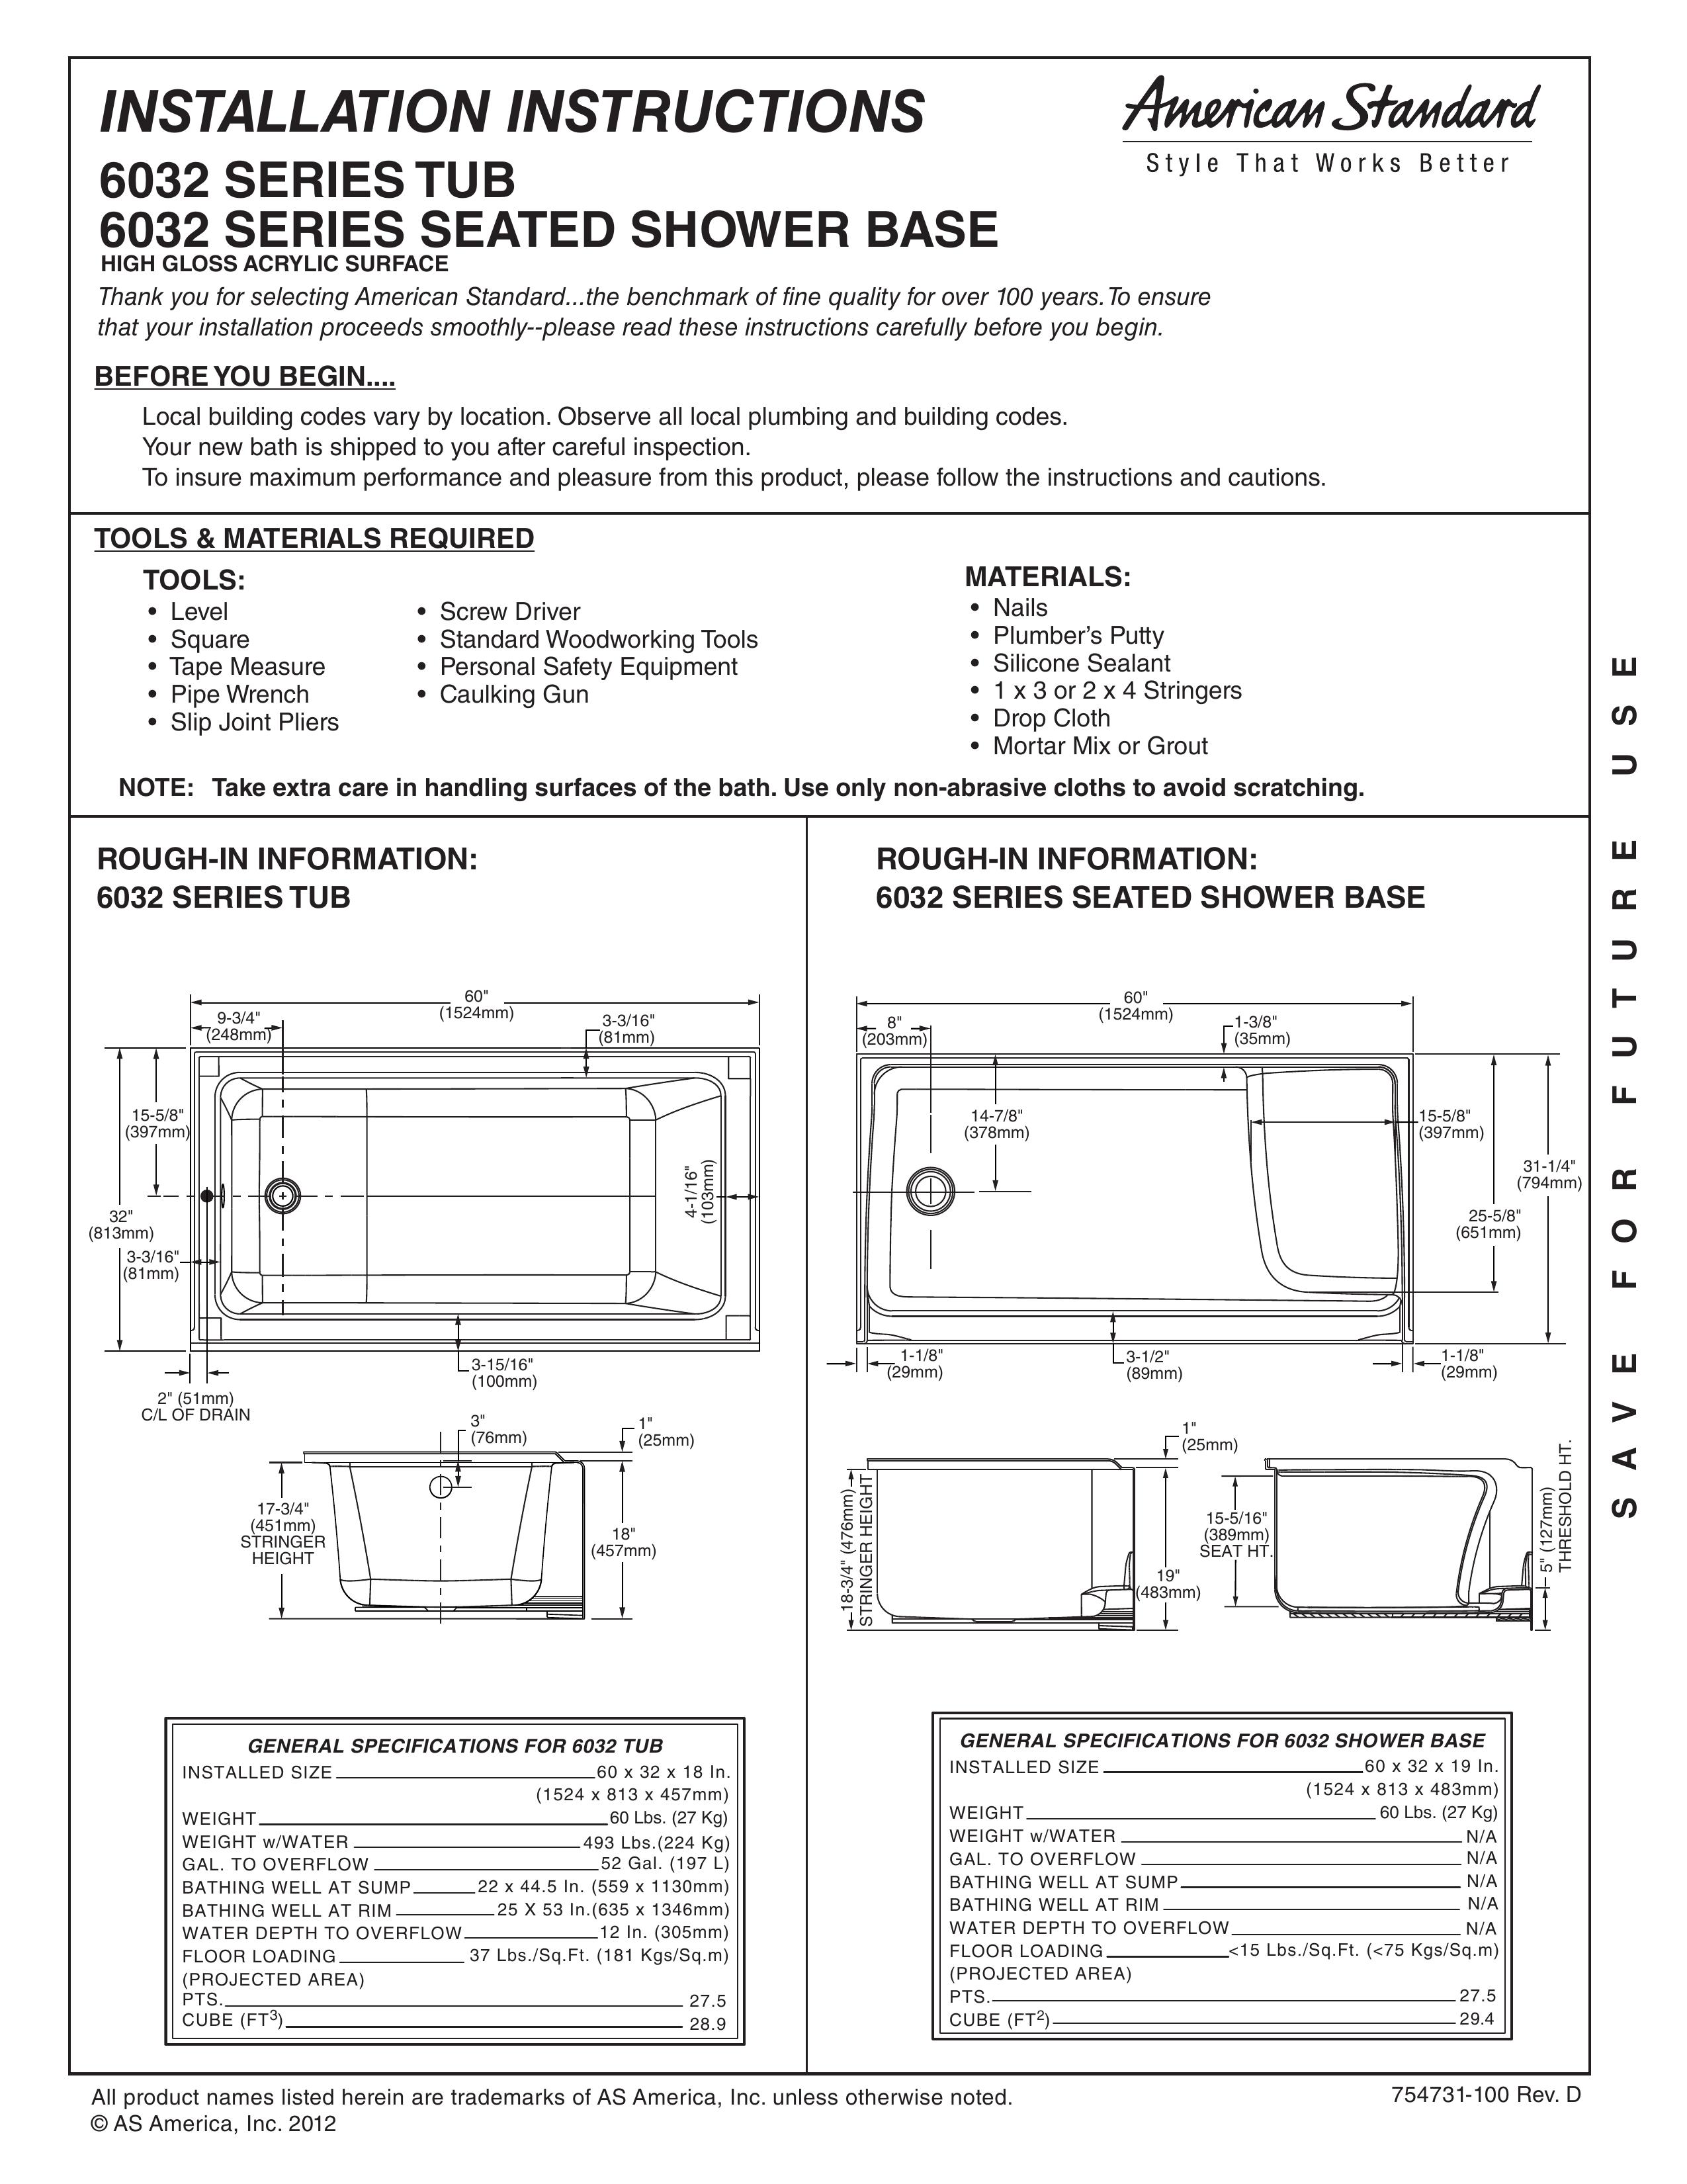 American Standard 6032 Series Seated Shower Base Bathroom Aids User Manual (Page 1)